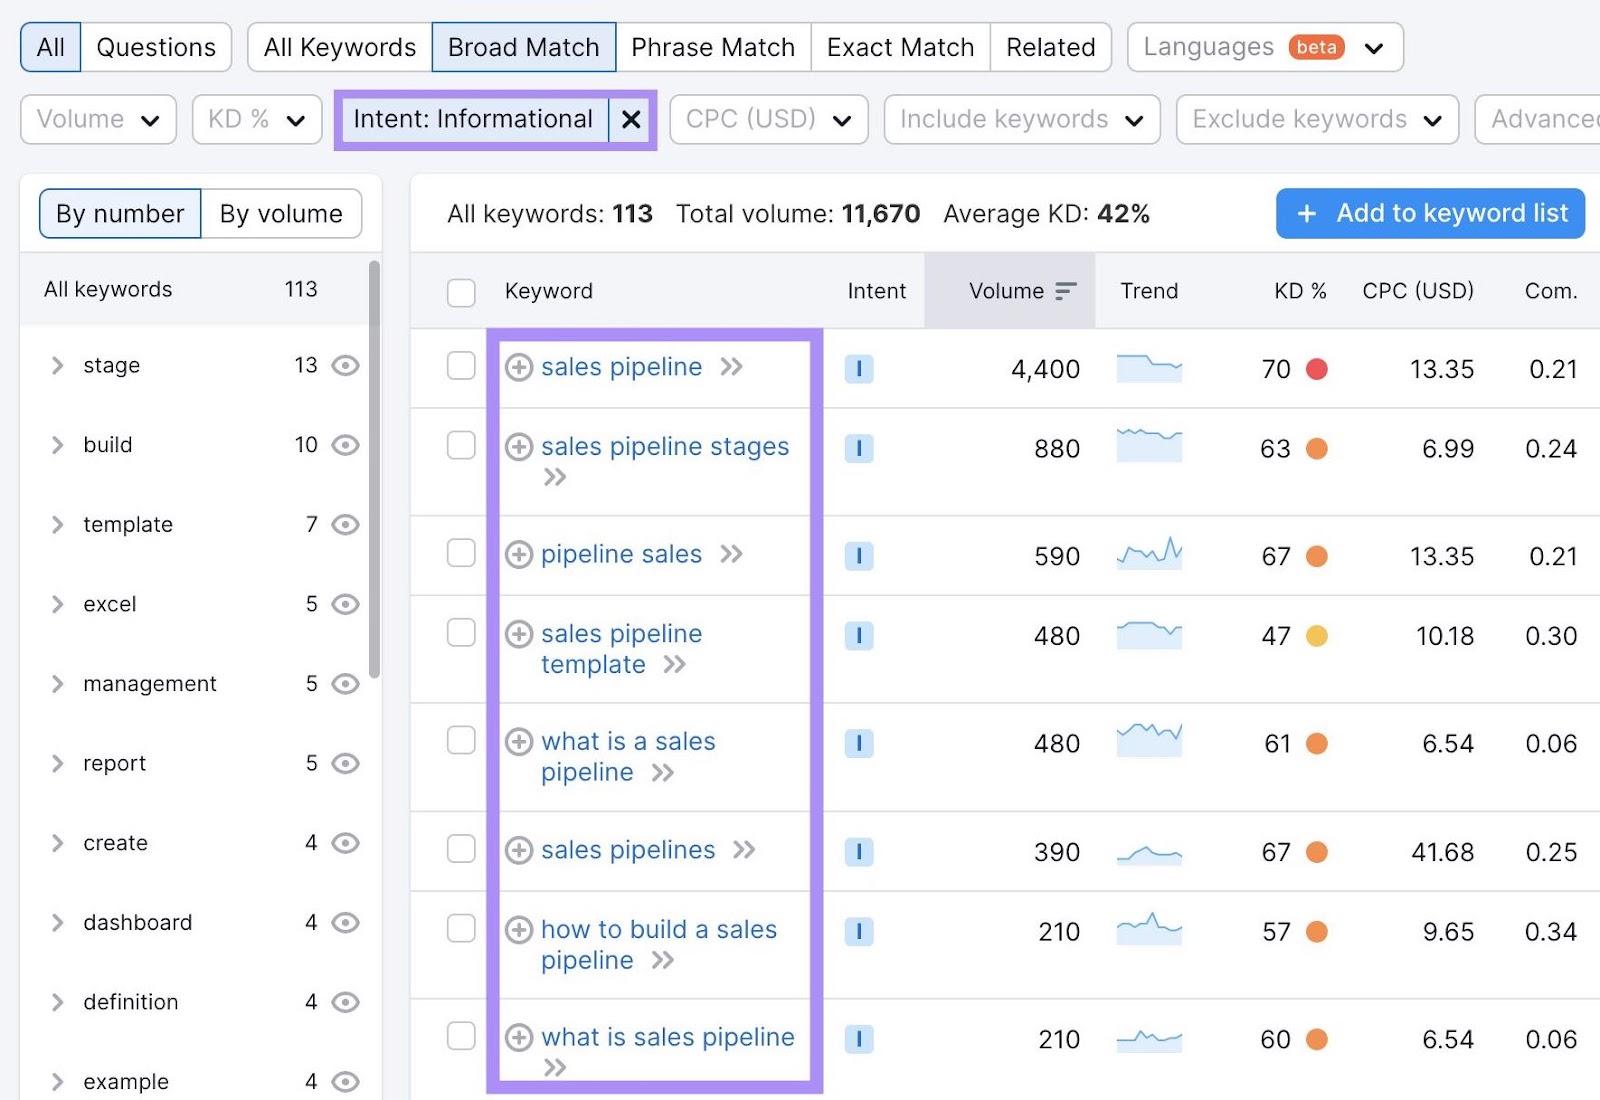 Keywords related to "sales pipeline" filtered by informational search intent